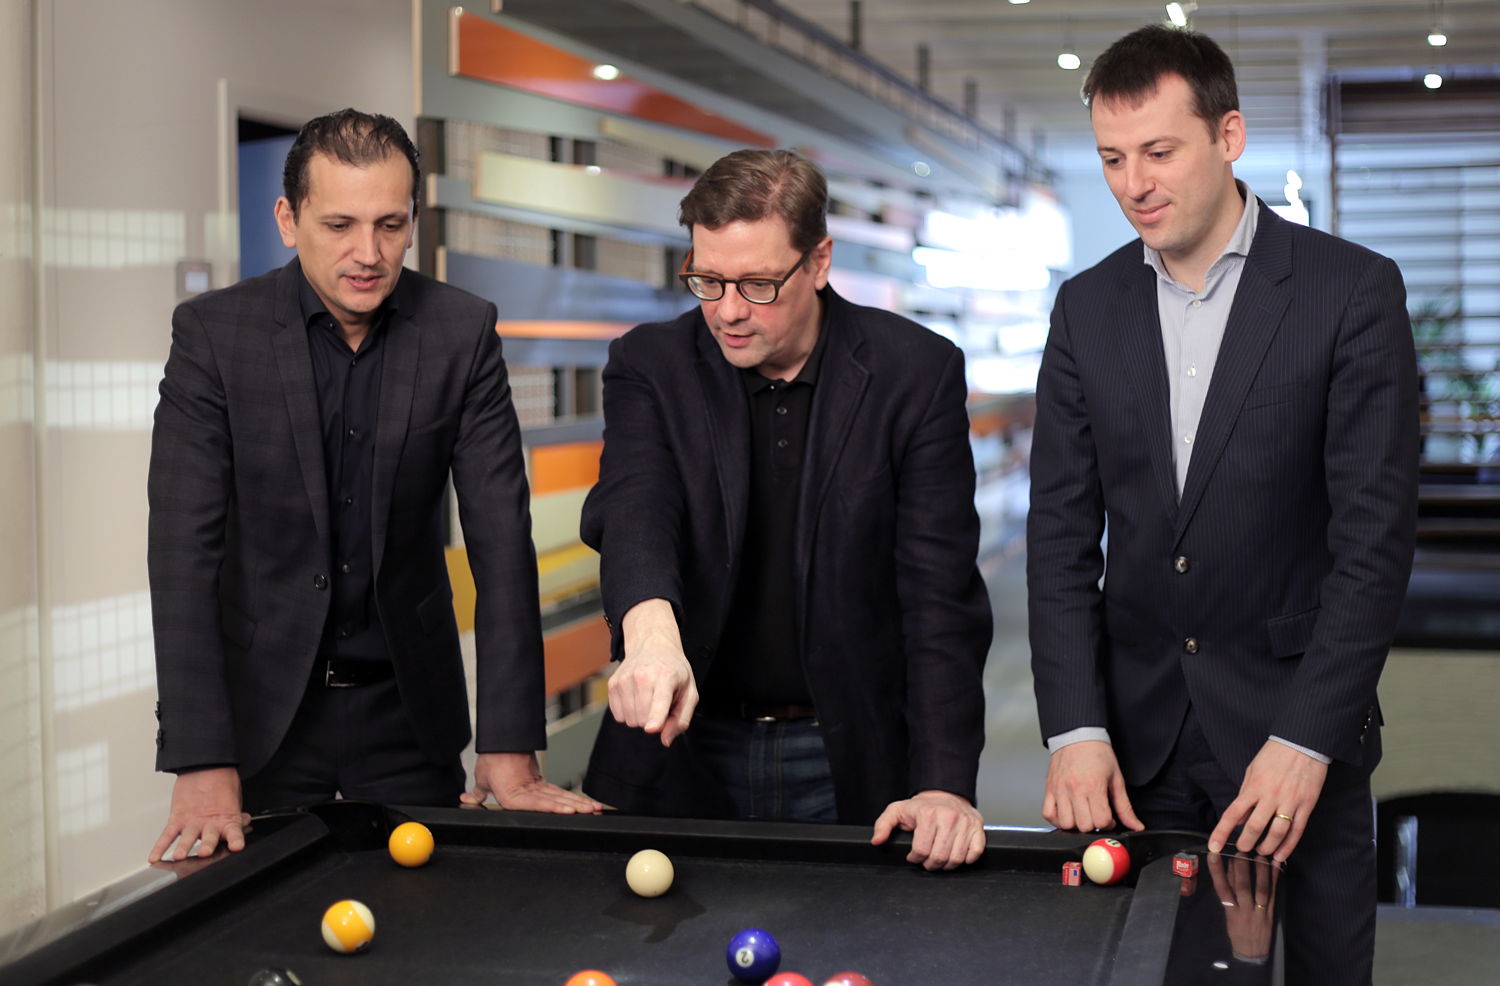 Emakina Group Management, with CEO's Karim Chouikri and Brice le Blévennec and CFO Frédéric Desonnay